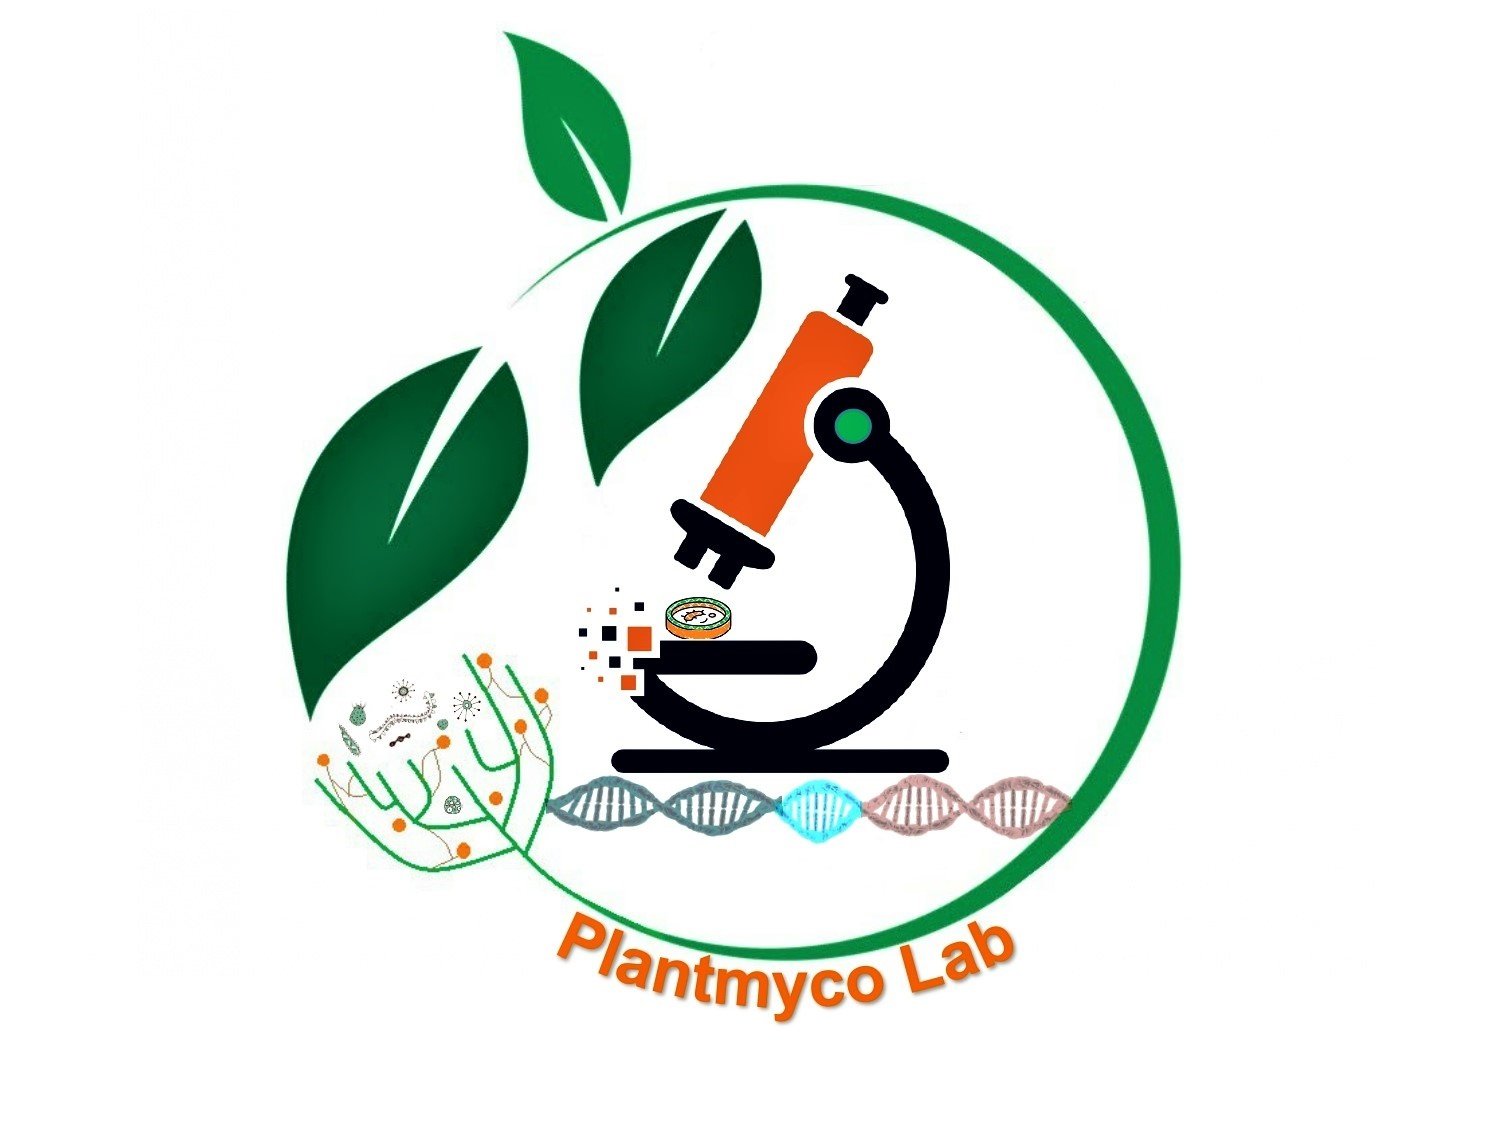 The PlantMycoLab